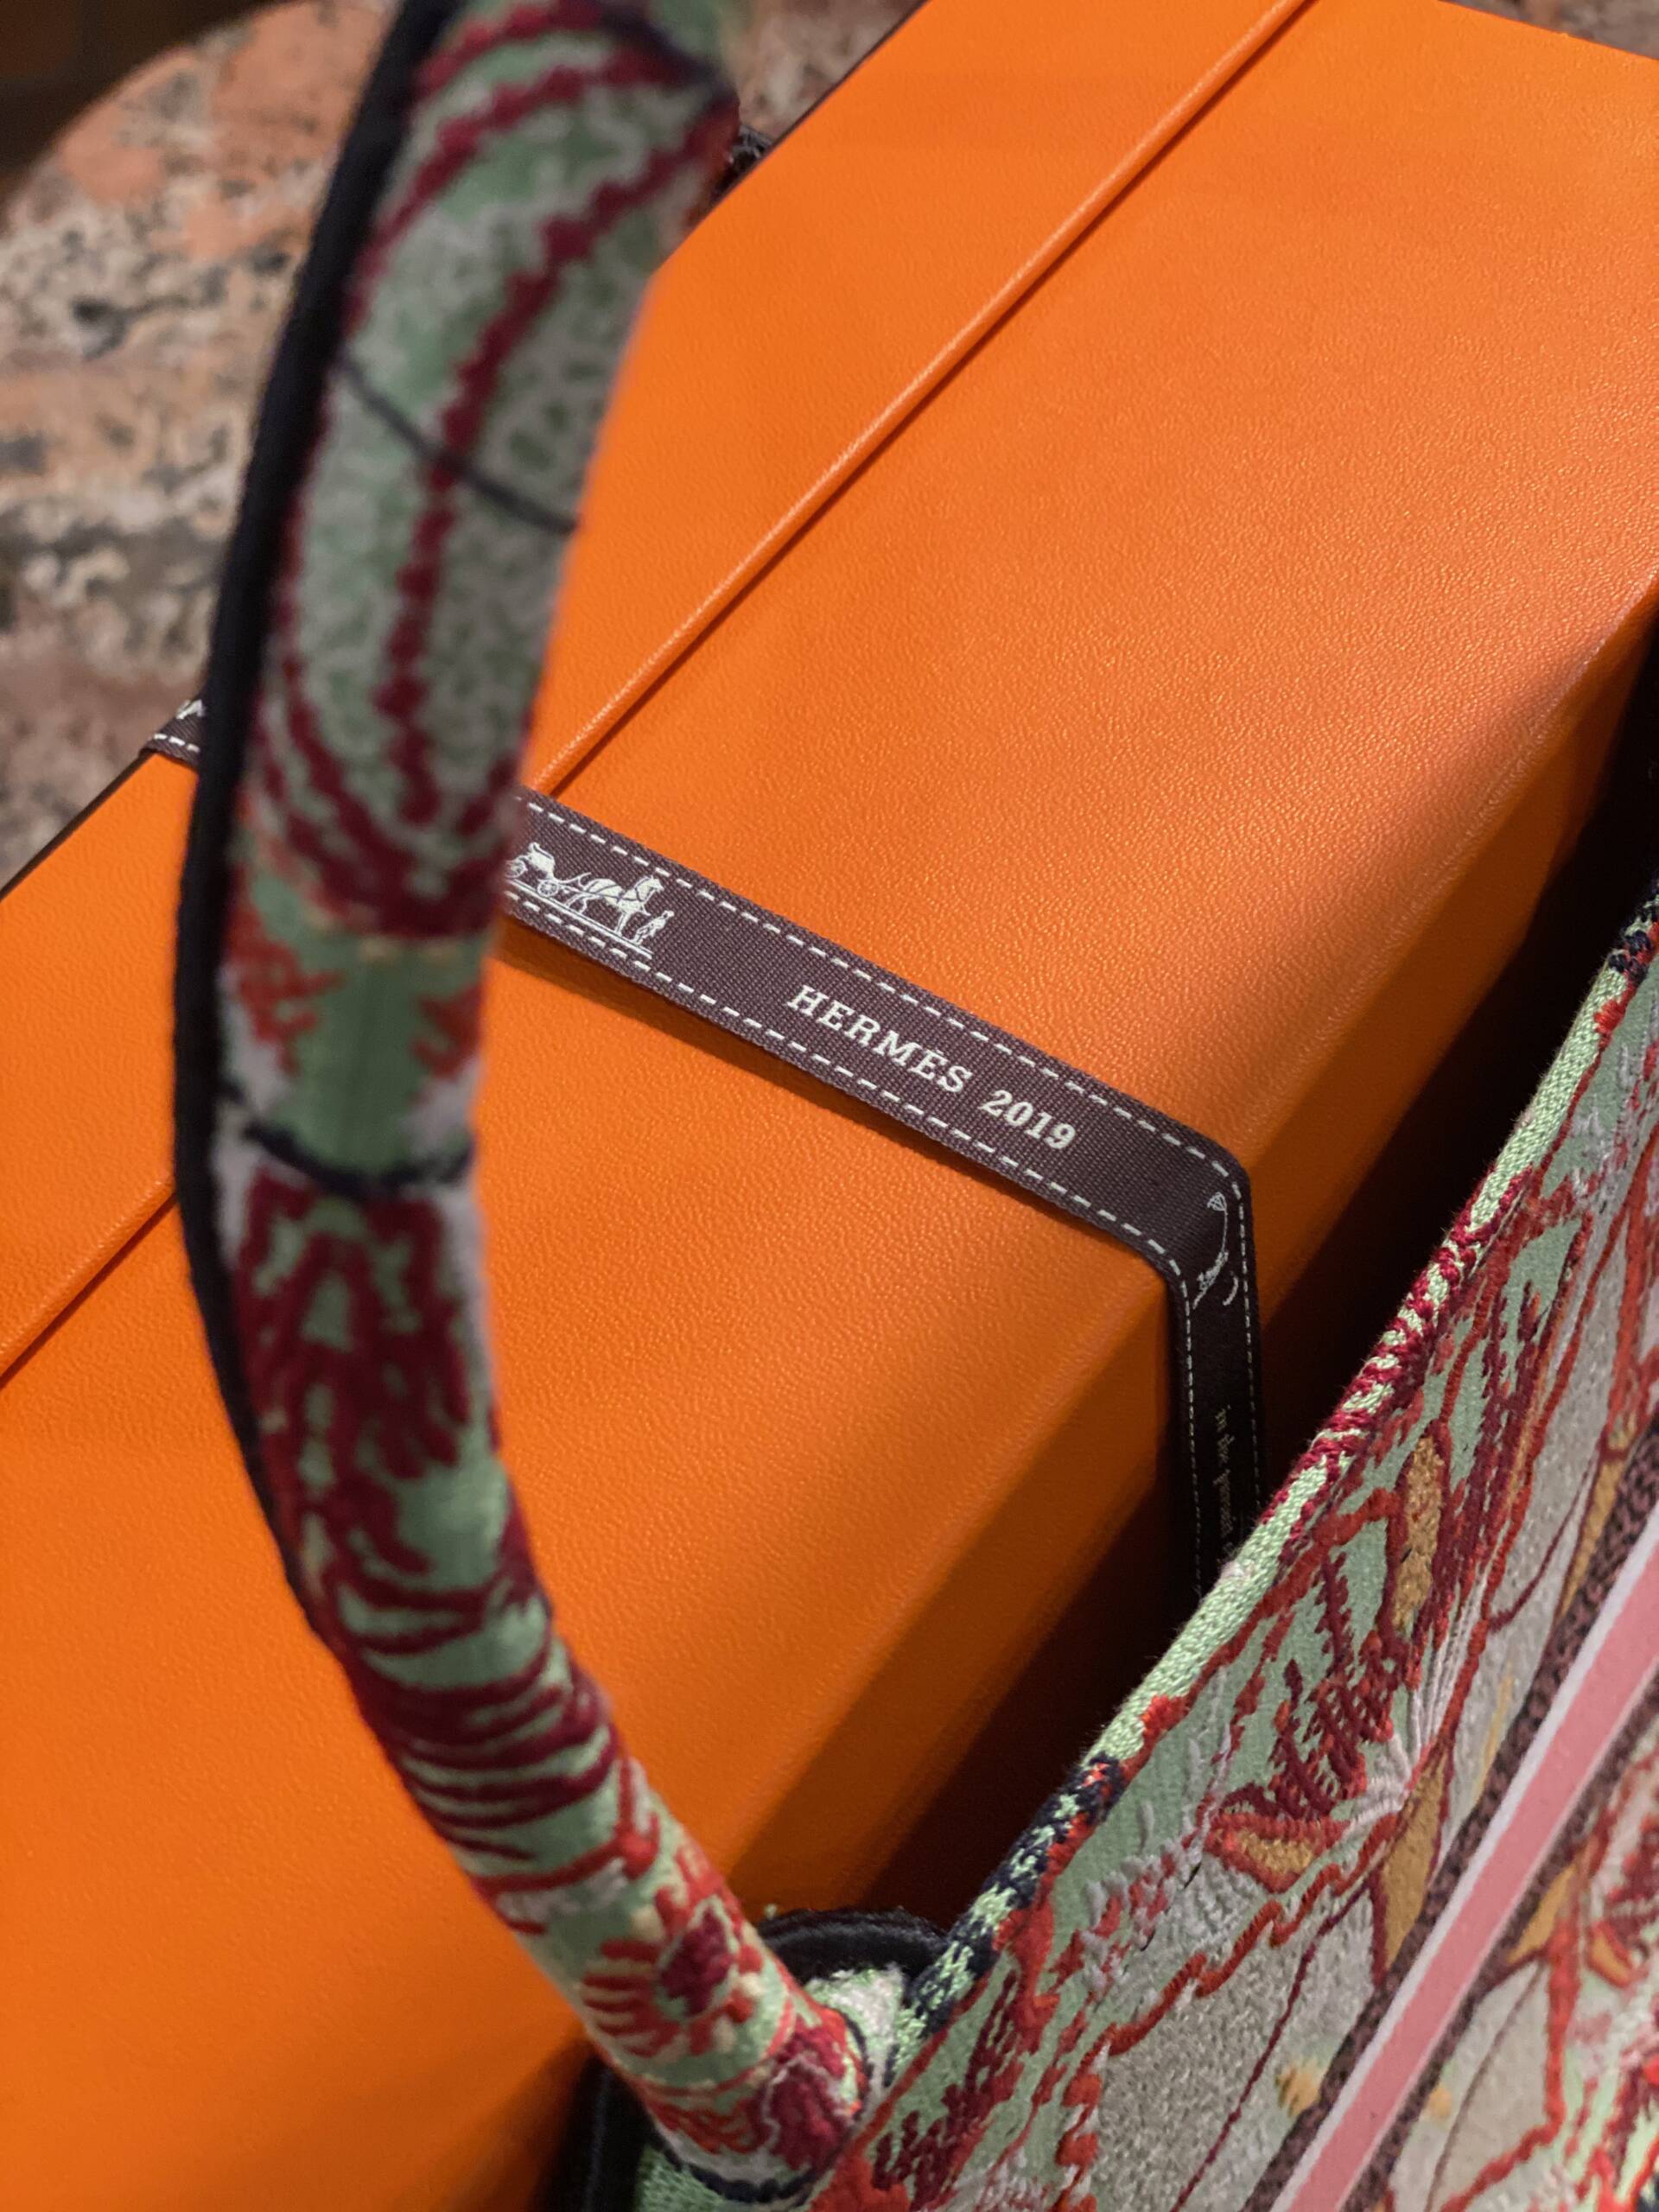 Review and Reveal of the Dior Book Tote